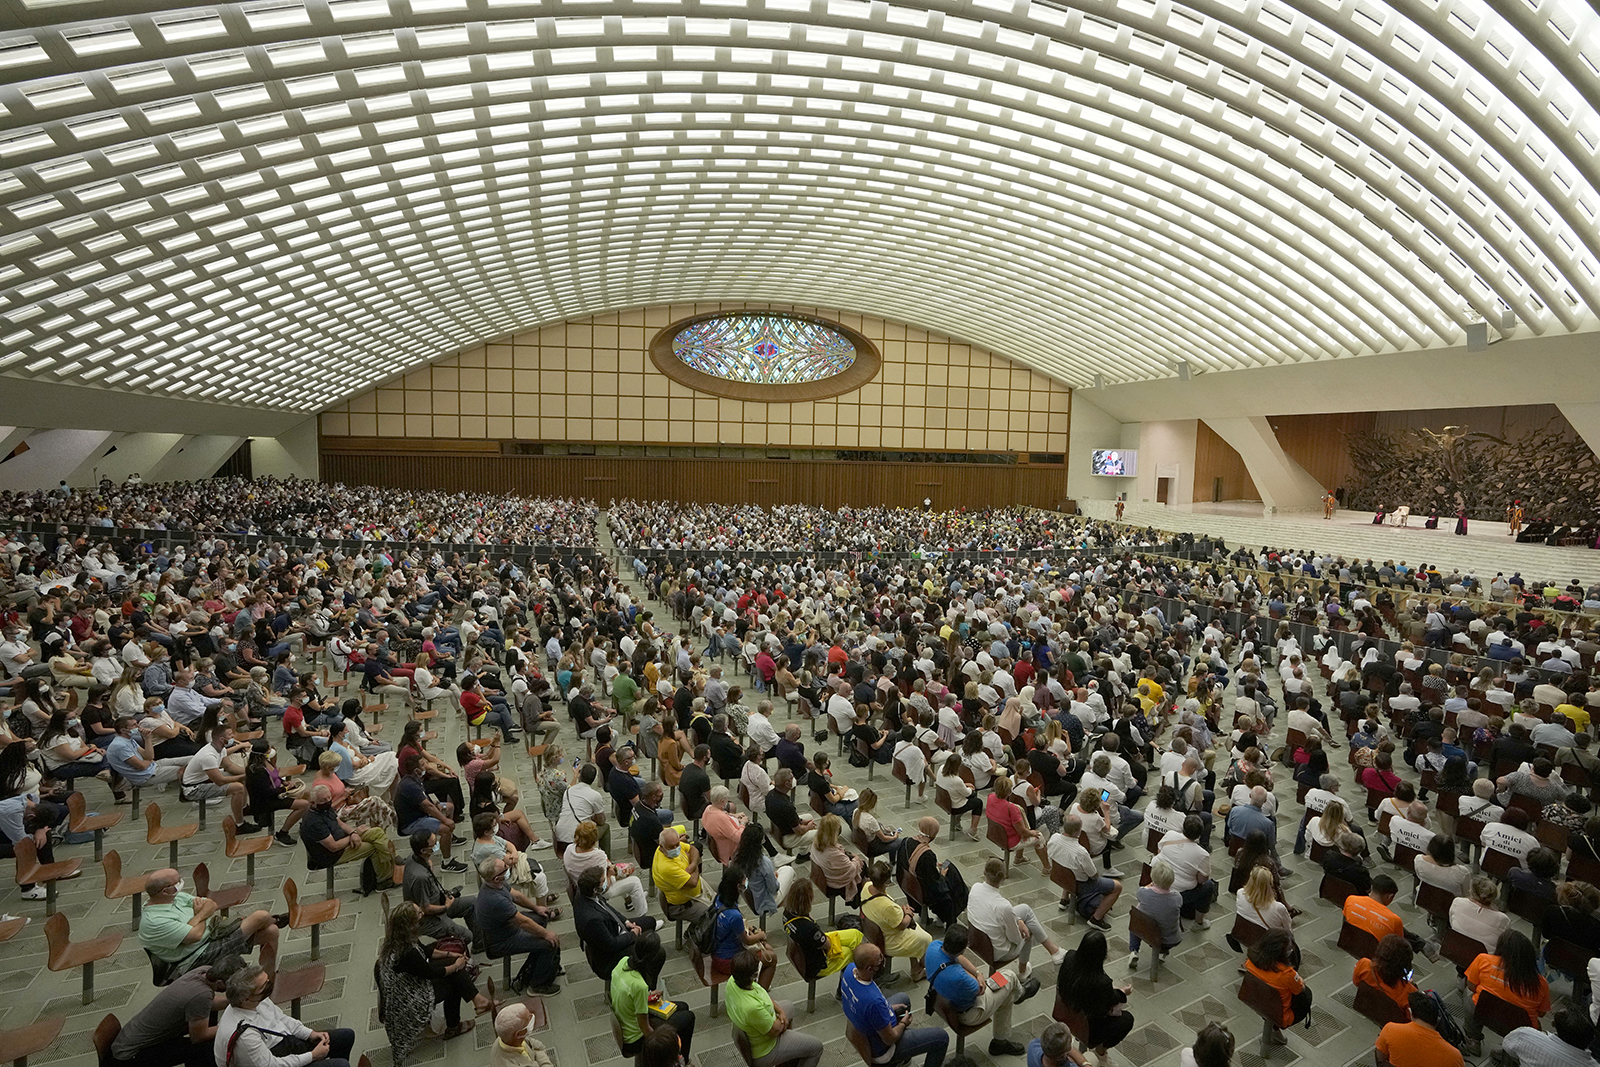 People listen to Pope Francis, white figure on stage, during his weekly general audience in Paul VI Hall, at the Vatican, Sept. 8, 2021. (AP Photo/Andrew Medichini)